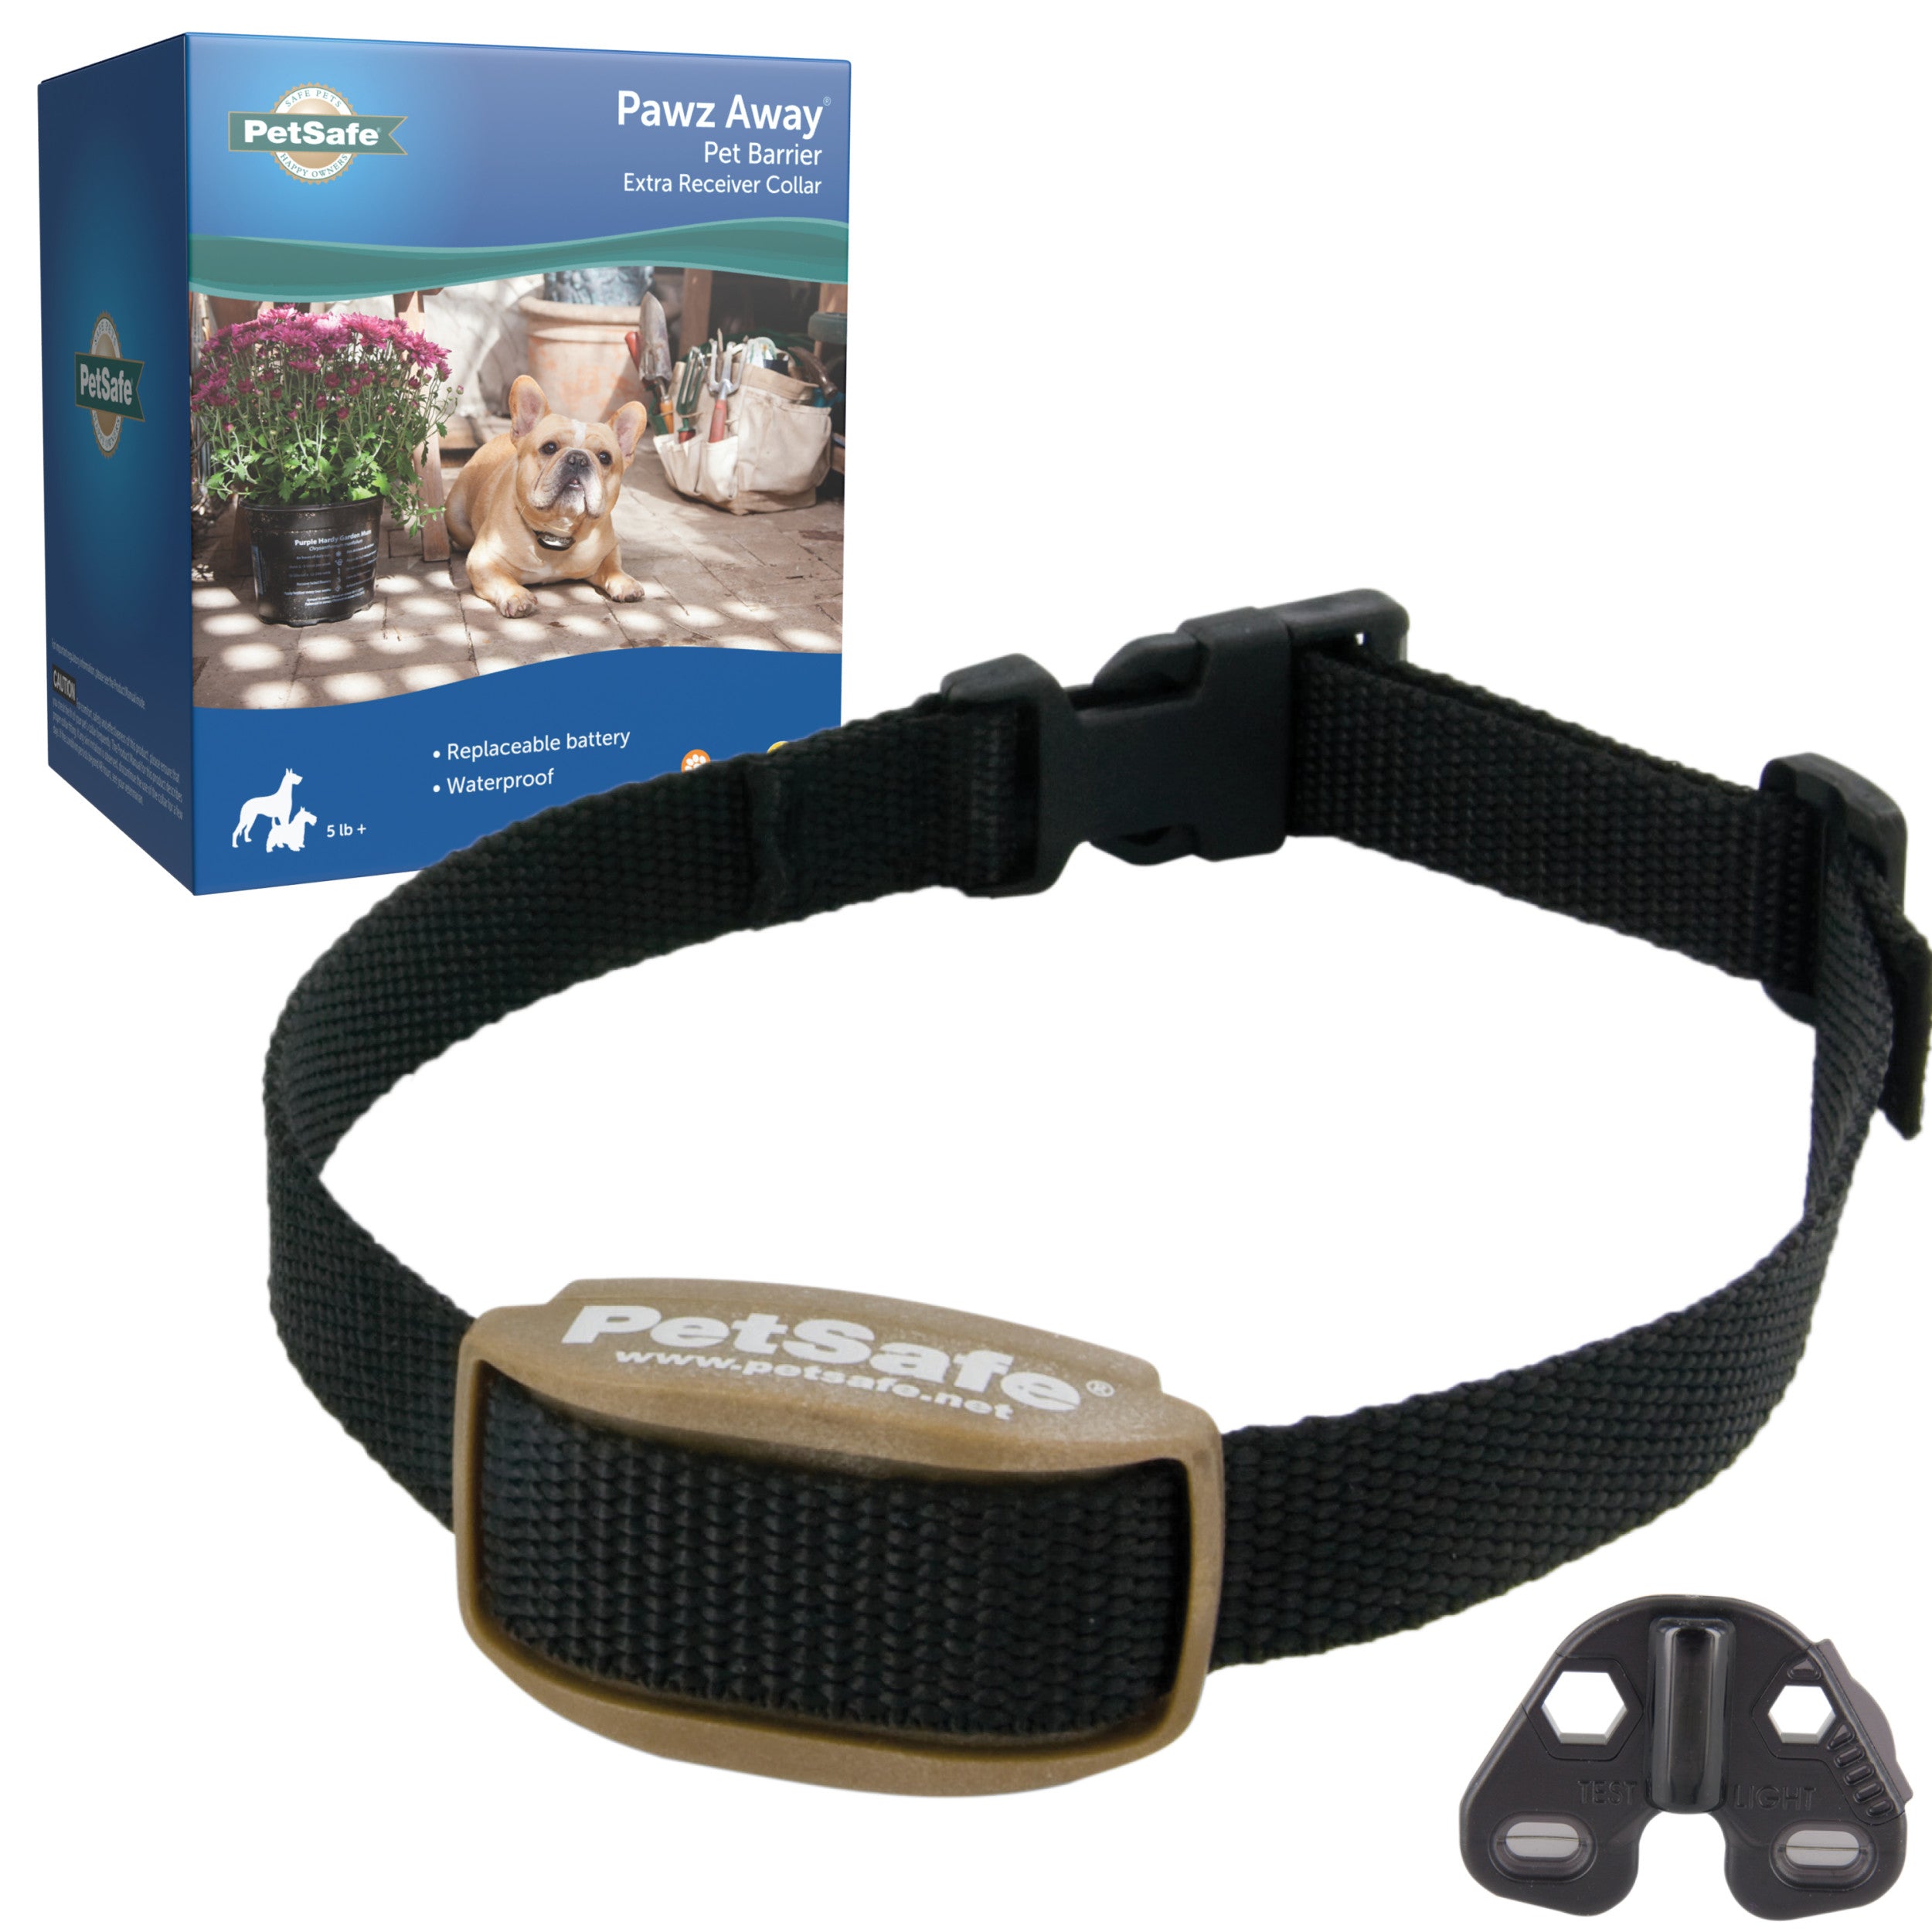 PetSafe Pawz Away Extra Receiver Collar for Cats and Dogs over 5 lb., Add  Additional Pets 